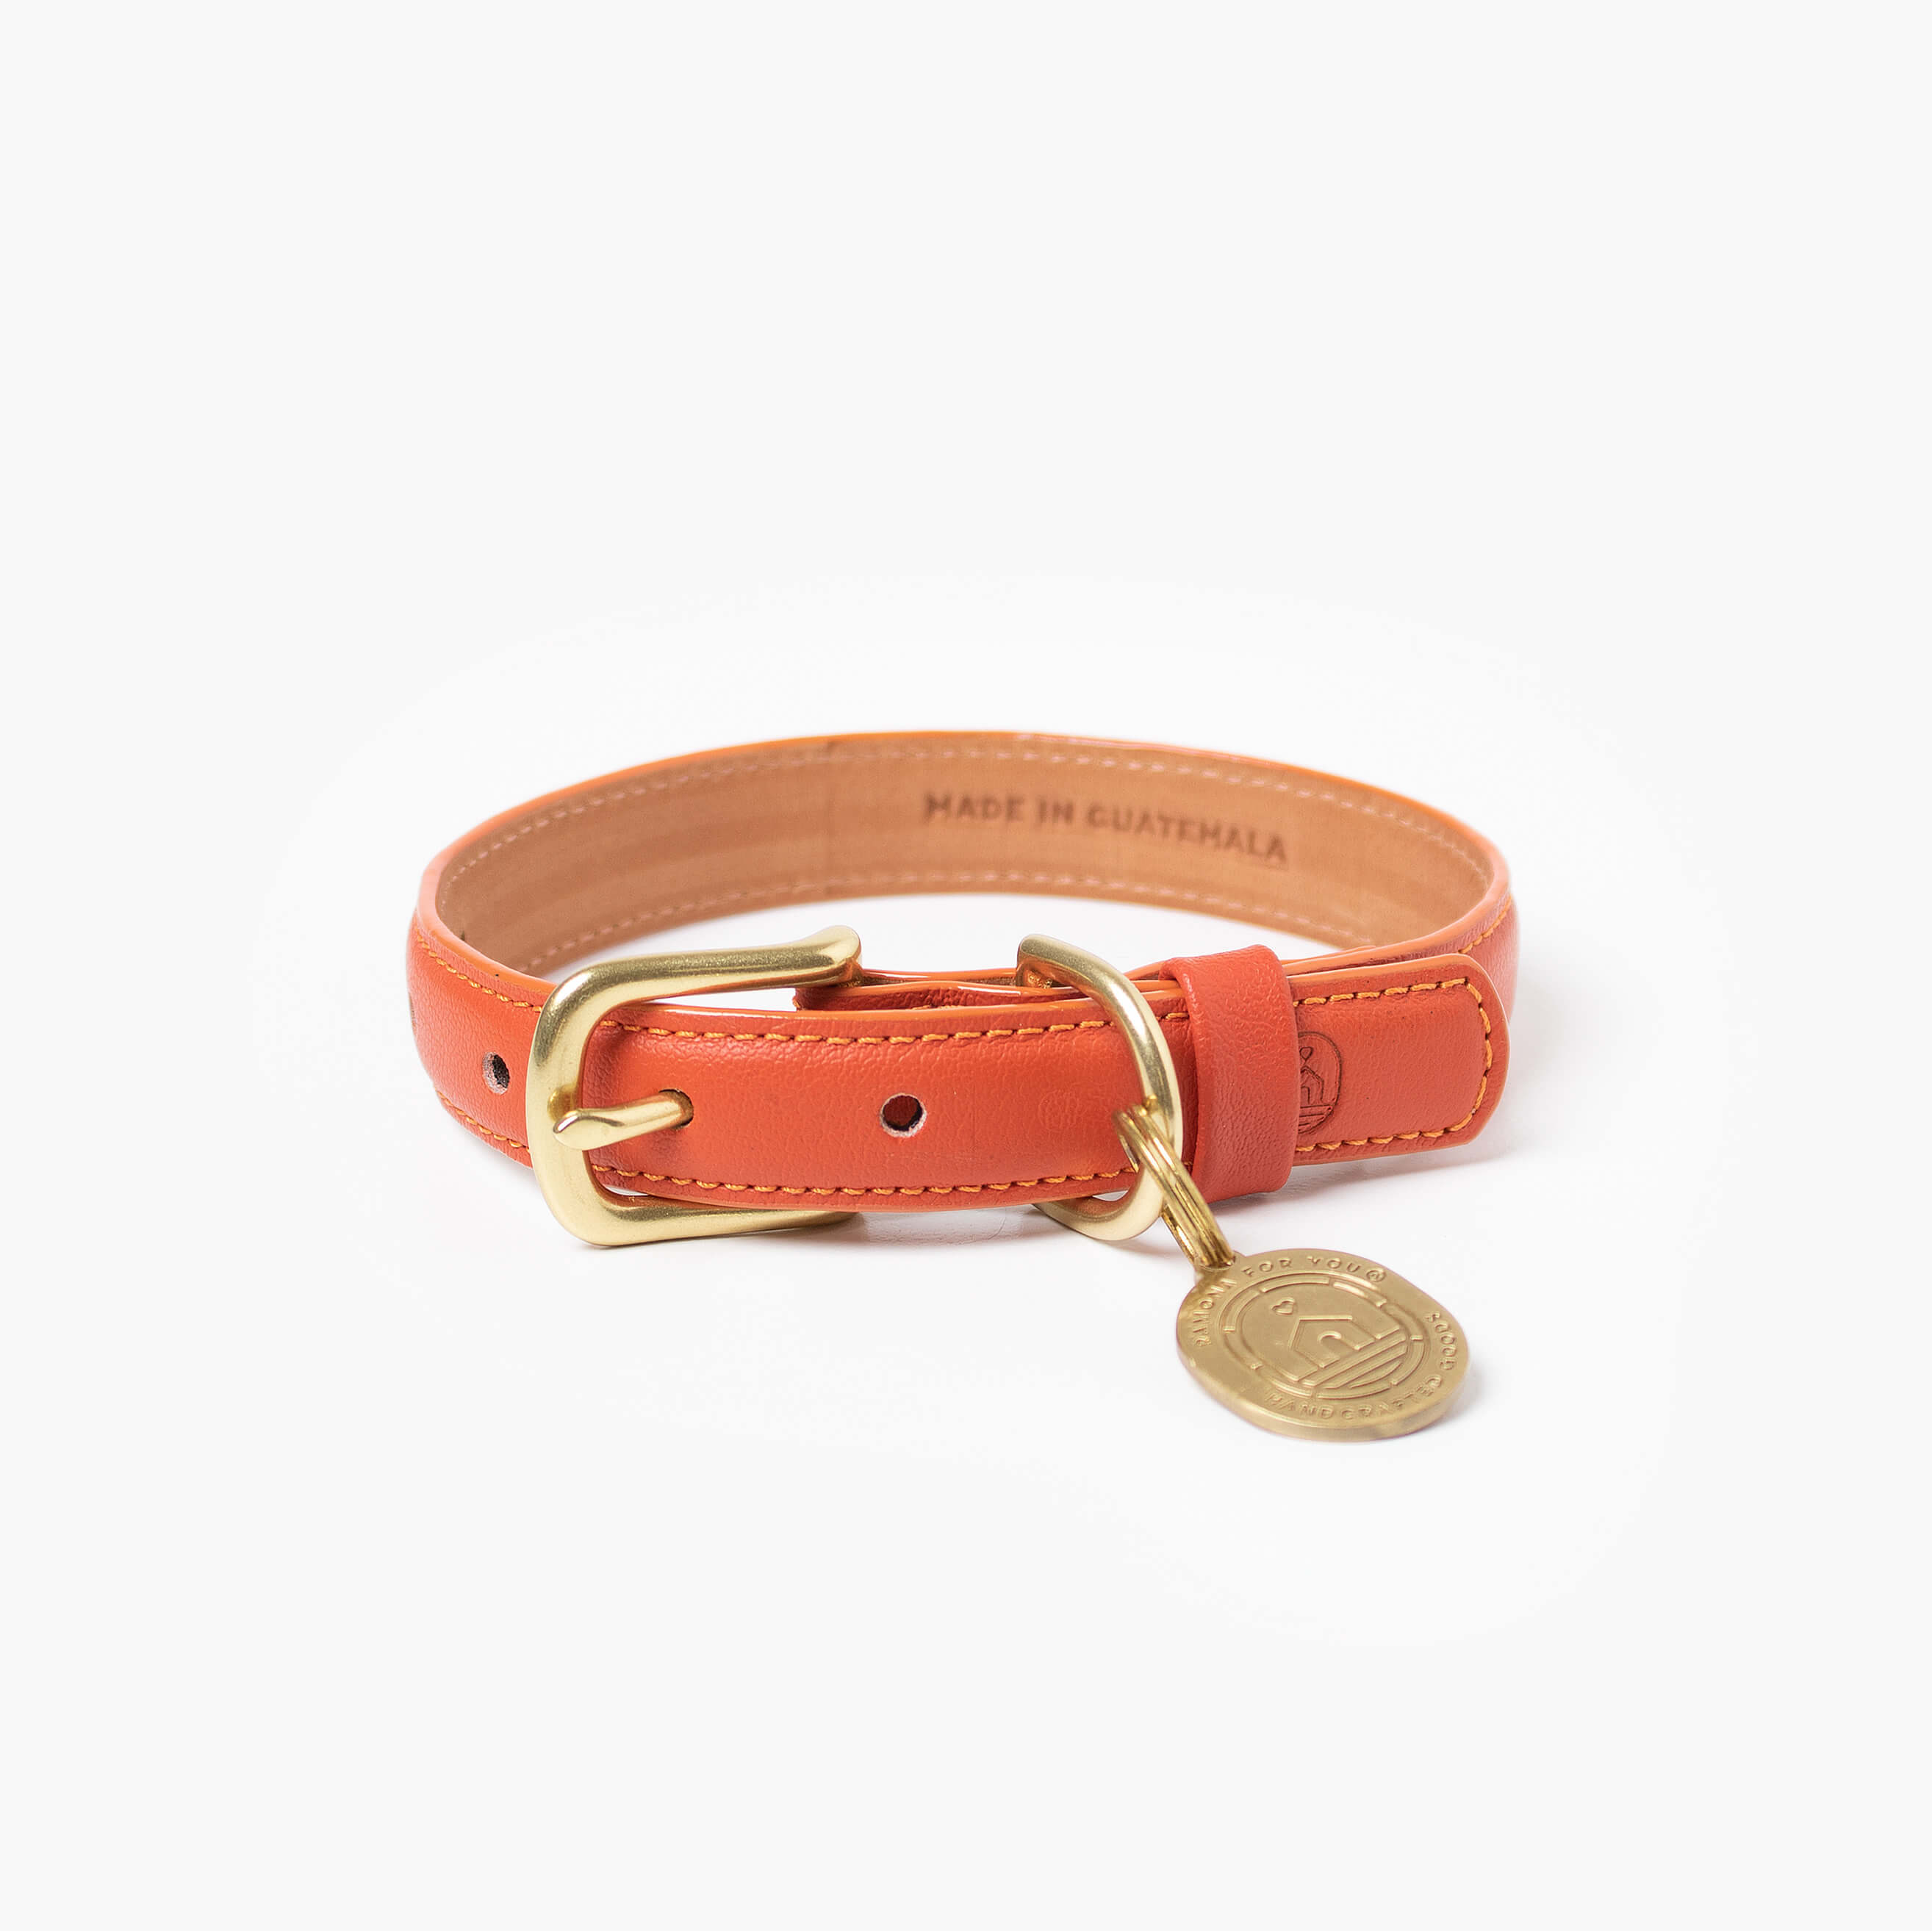 Orange leather dog collar with with brass hardware and tag ID. Luxury dog collar.